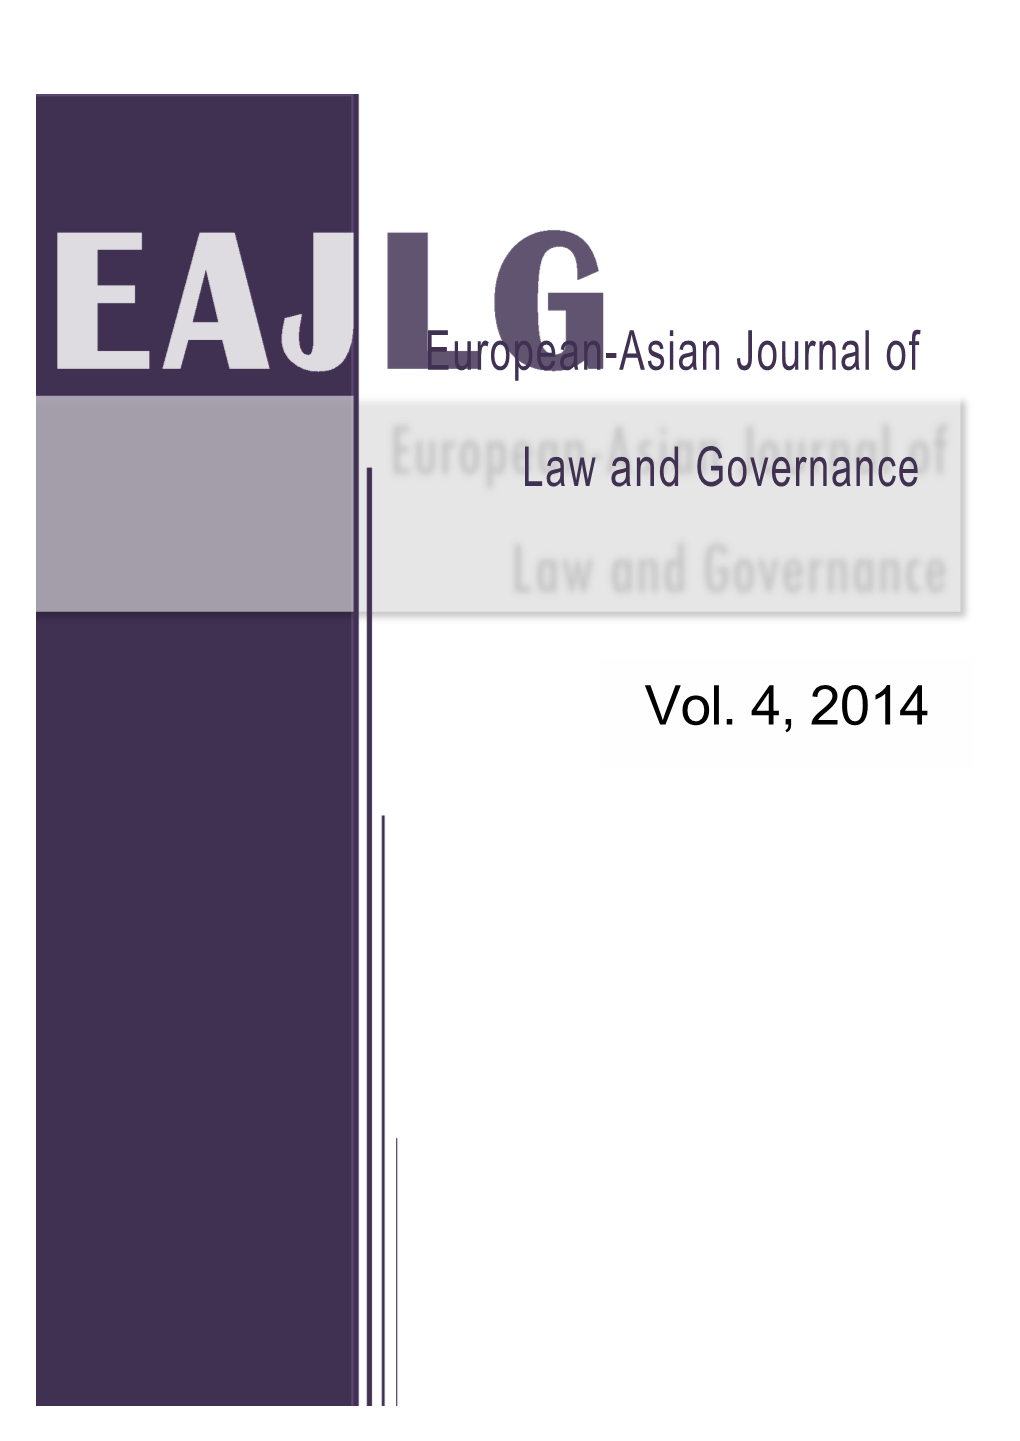 European-Asian Journal of Law and Governance Vol. 4, 2014